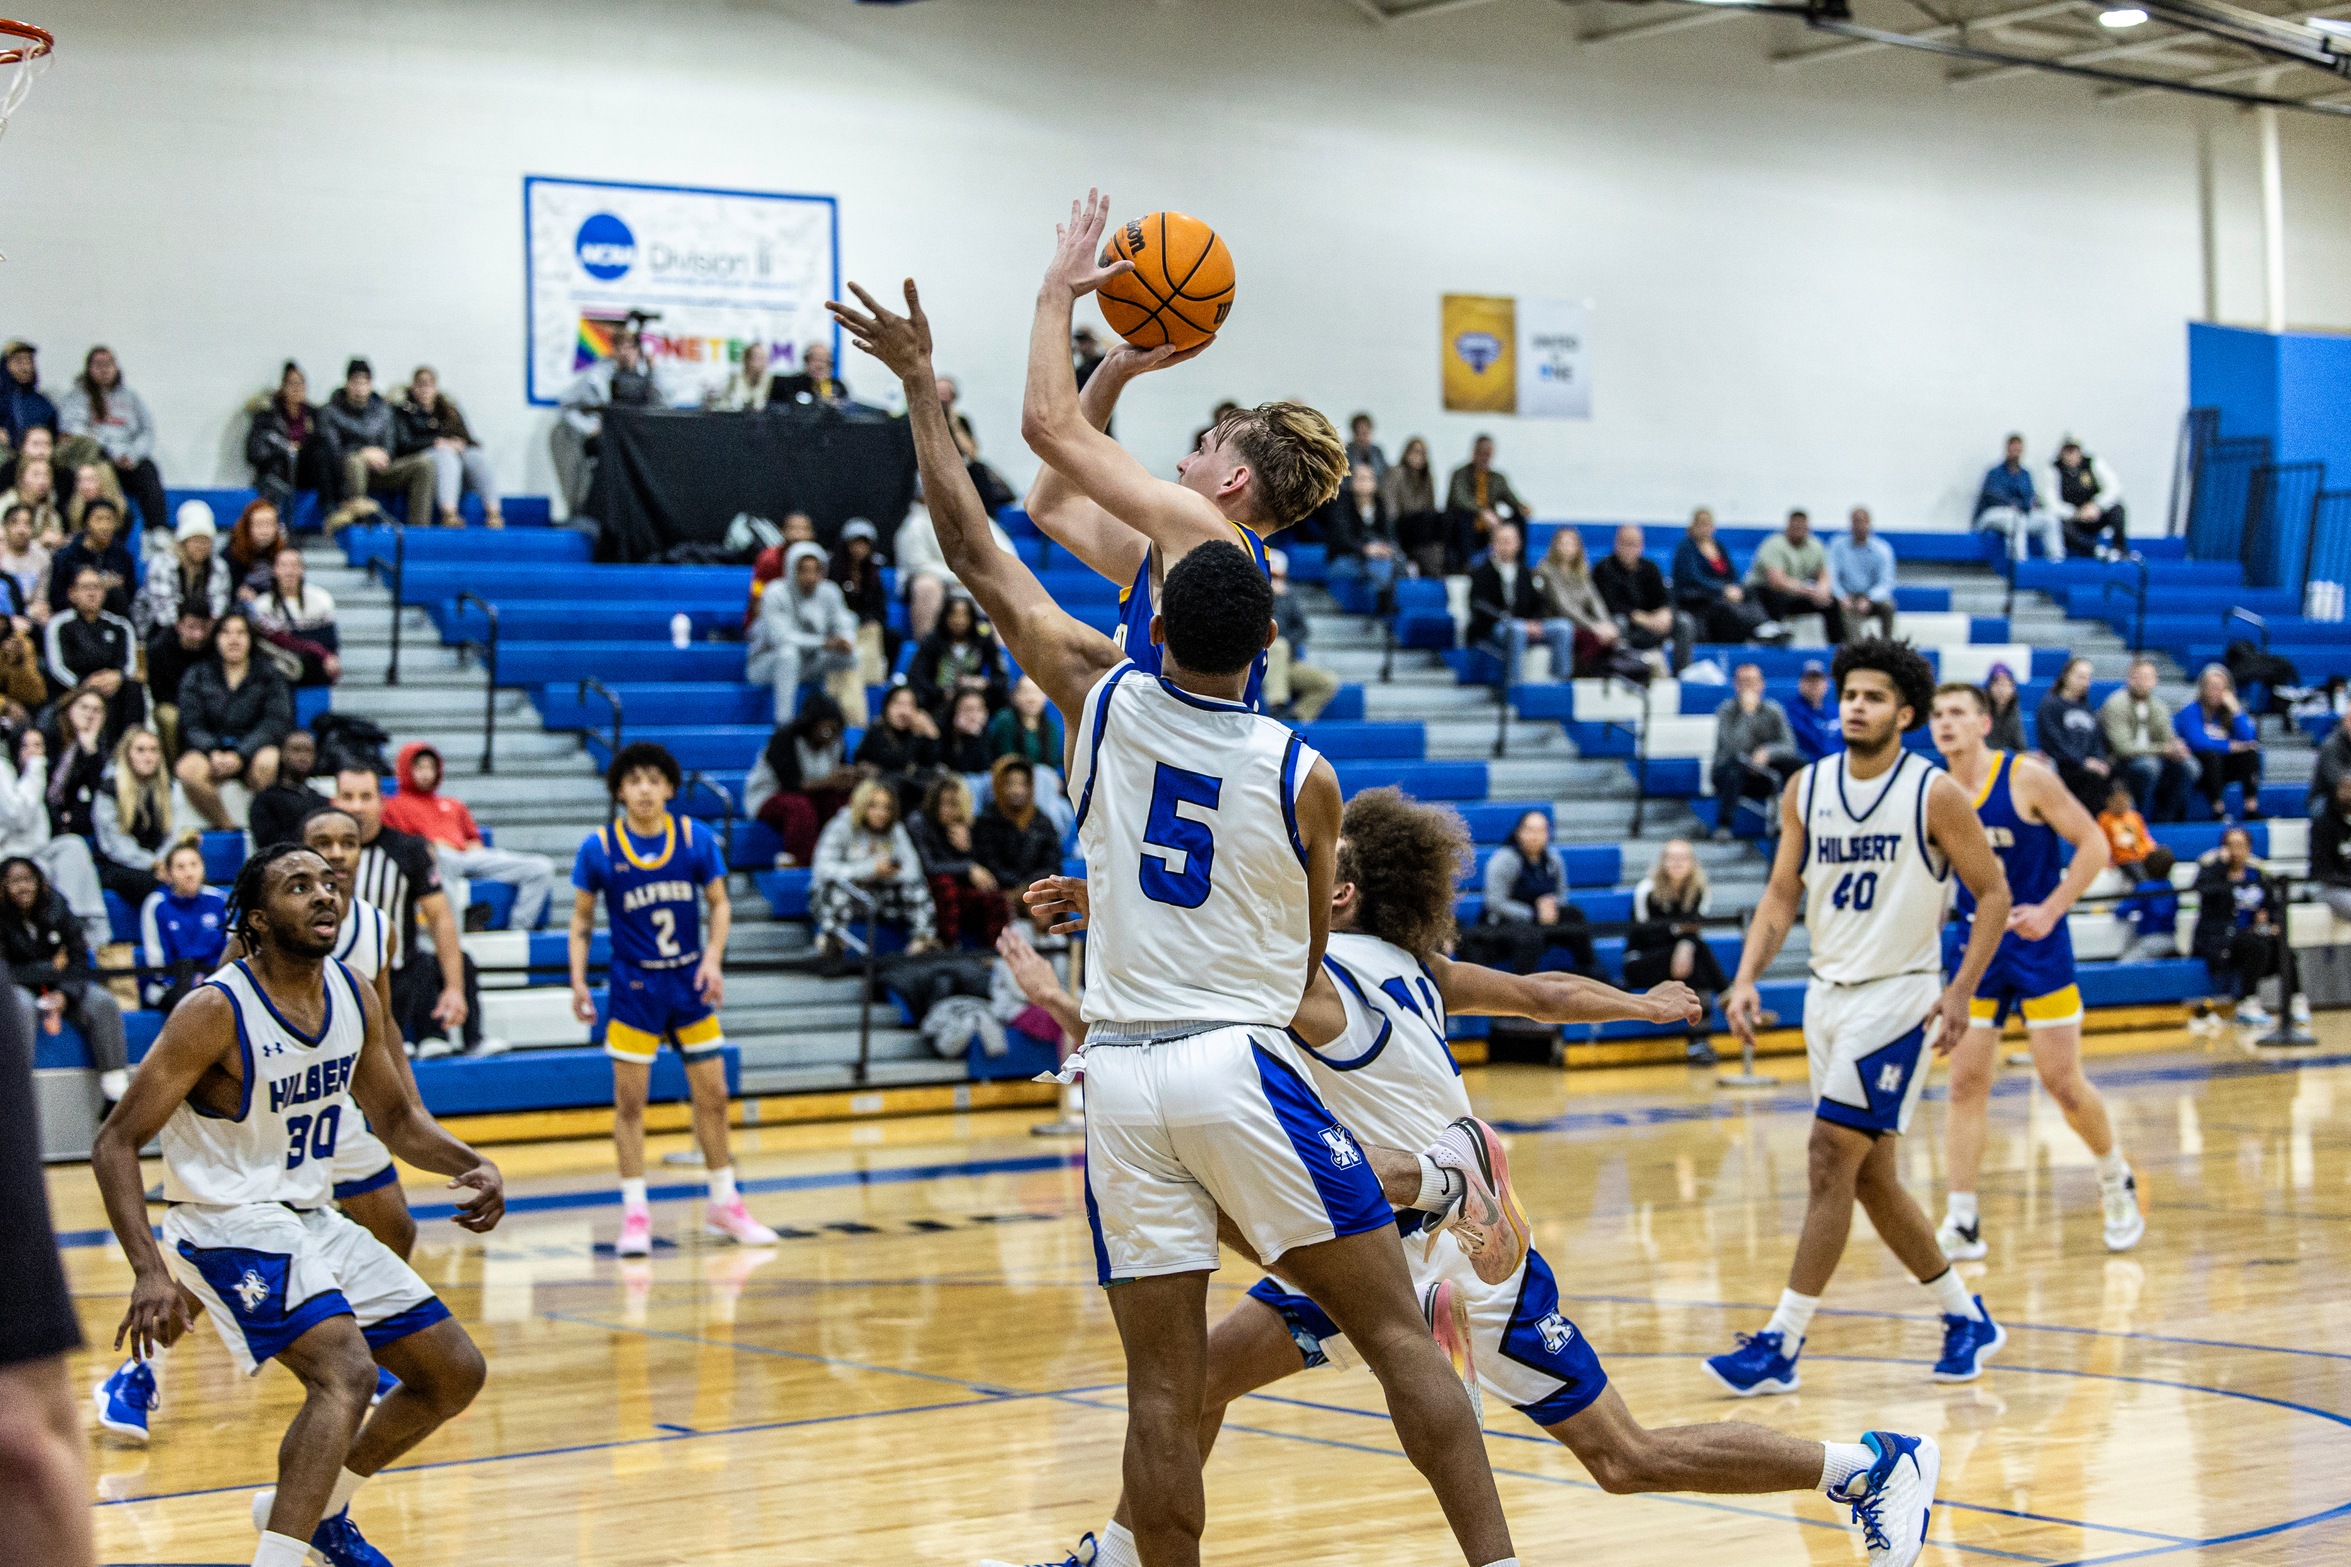 Pioneers Drop A Close Contest To Hilbert